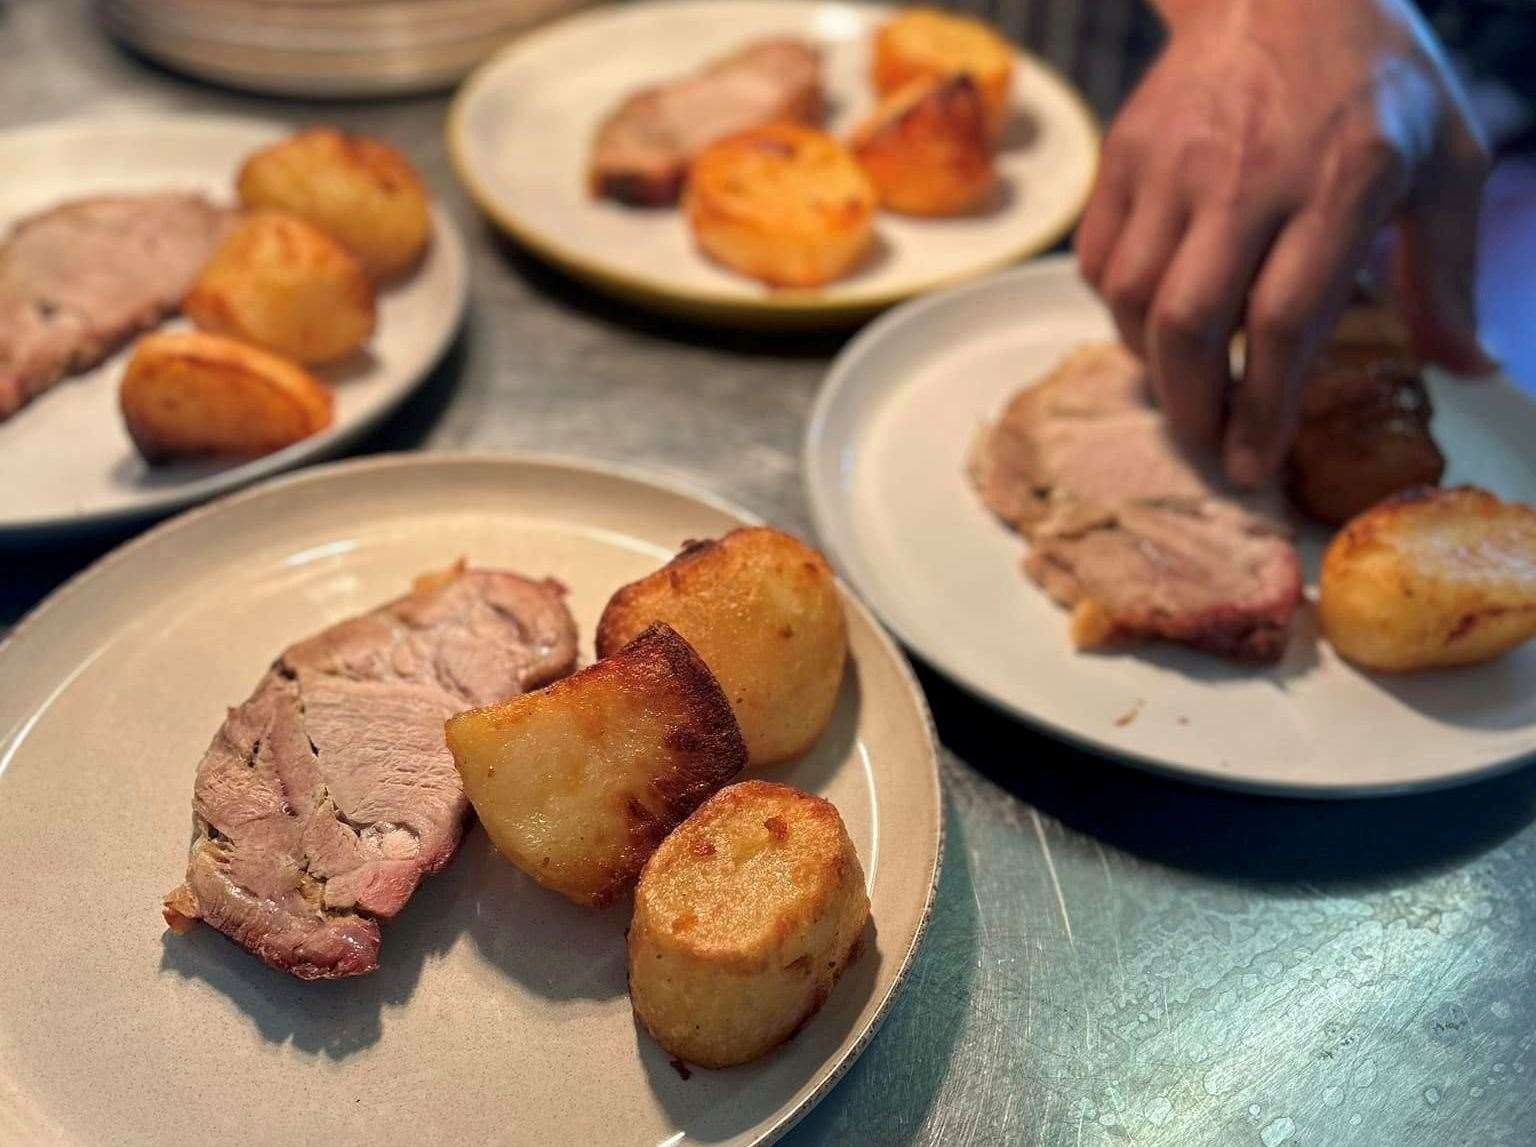 Plating up the roast dinners at The Queens Head